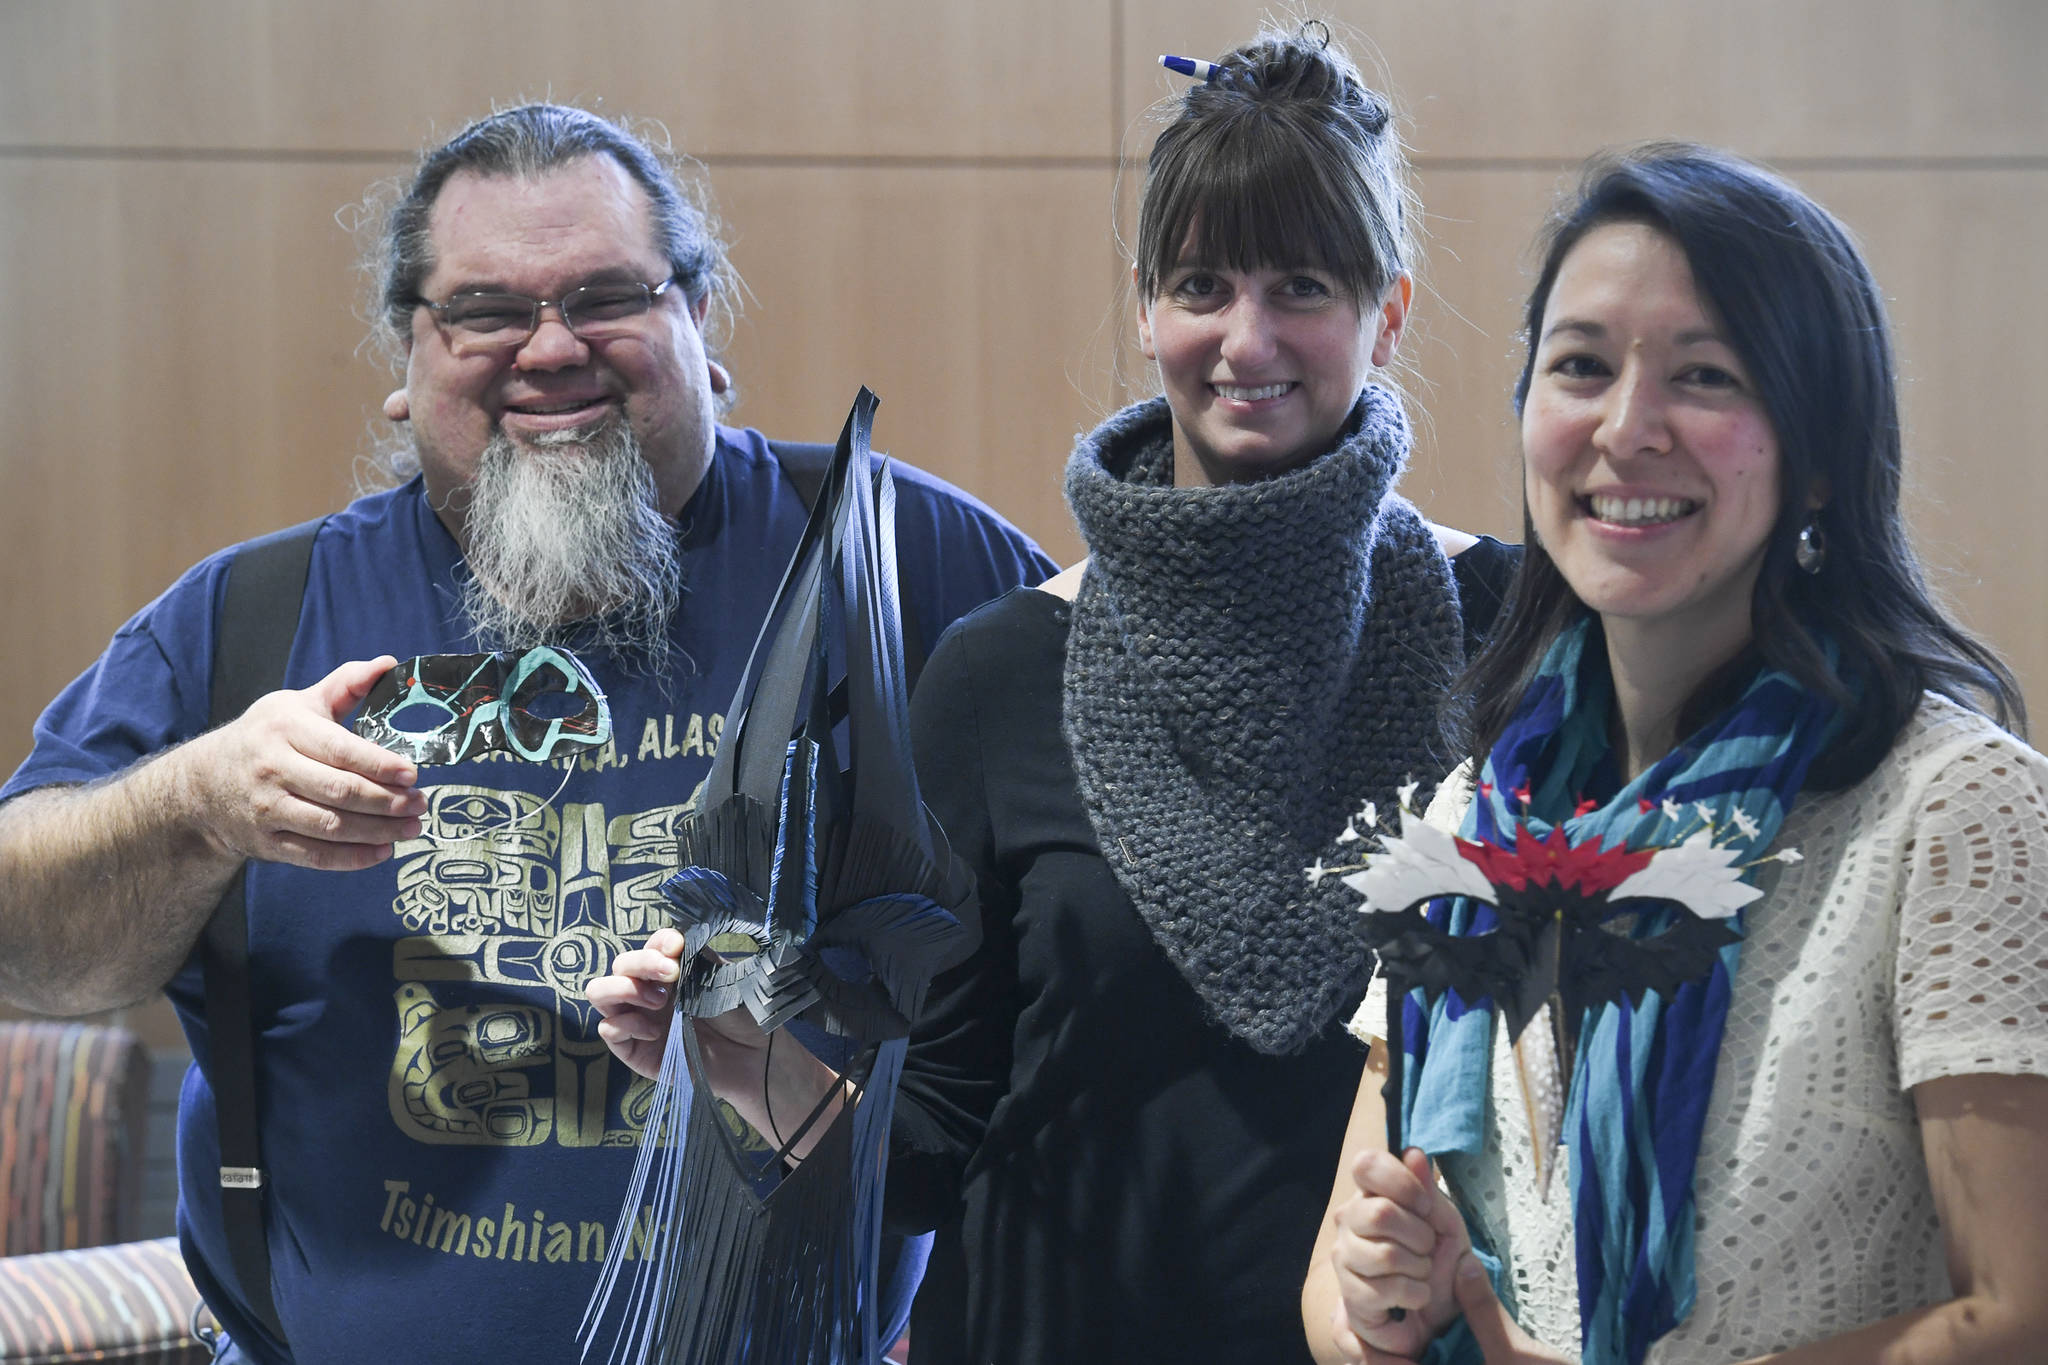 Artists Abel Ryan, left, Tanna Peters, center, and Nobu Koch hold masks they made for the Mask-erade fundraising event put on by the Friends of the Alaska State Library, Archives and Museum to be held on Saturday, Oct. 19, from 8 to 11 p.m. Nine artists created masks to be auctioned off at the dance. Live music will be provided by Susu and the Prophets. Masks can be made Saturday 1-3:30 p.m. Watch the video below to learn more about the masks and the artist who made them. (Michael Penn | Juneau Empire)